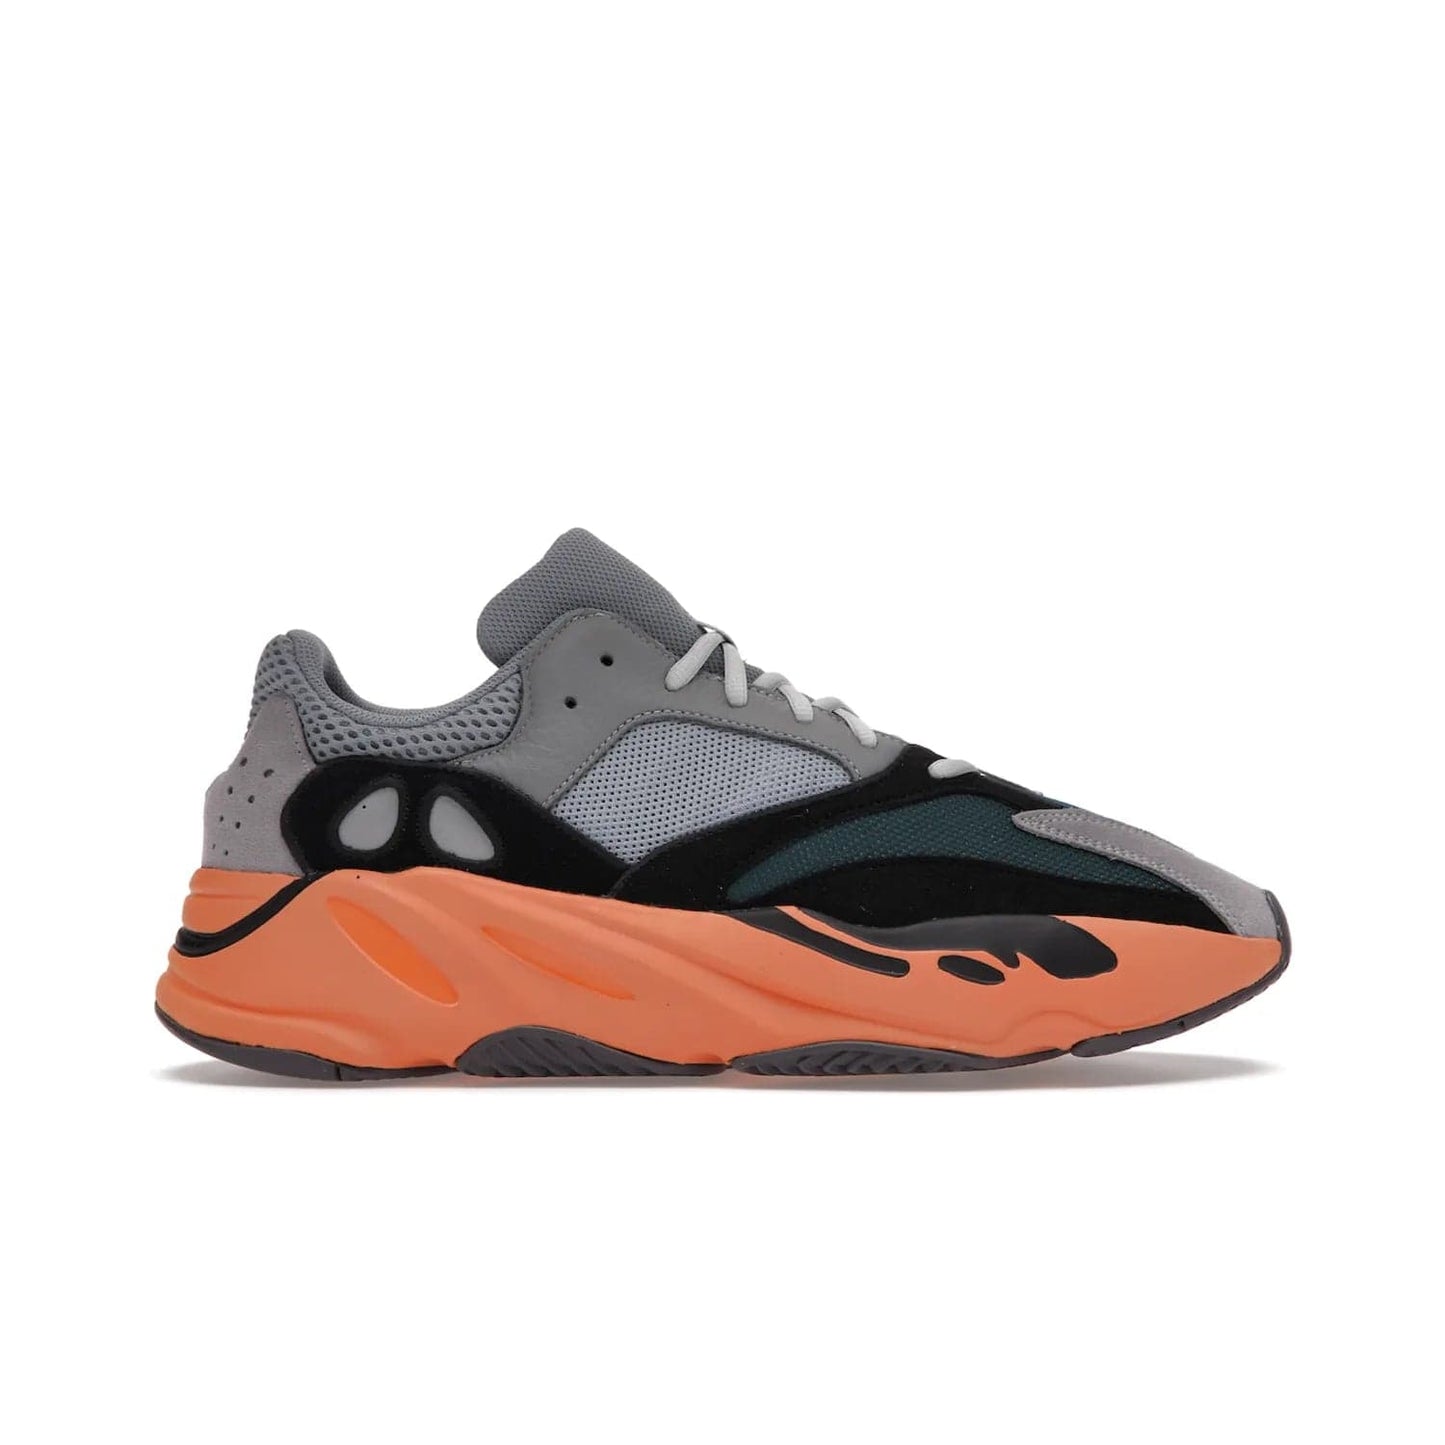 adidas Yeezy Boost 700 Wash Orange - Image 1 - Only at www.BallersClubKickz.com - Introducing the adidas Yeezy Boost 700 Wash Orange. Unique grey leather, suede, mesh upper and teal panels with a chunky Wash Orange Boost midsole. Release October 2021, make a statement today!